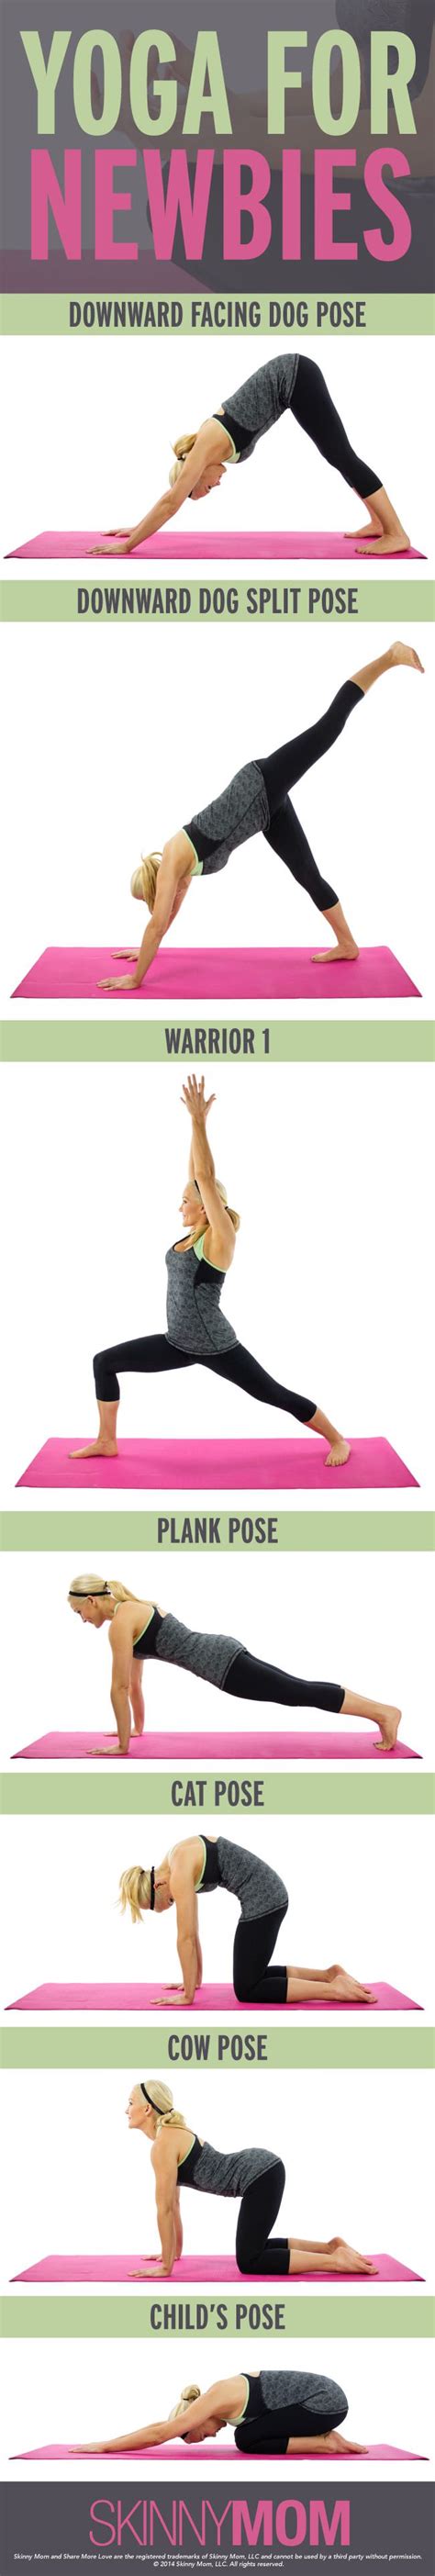 Research Has Proven Yoga Can Improve Balance For Stroke